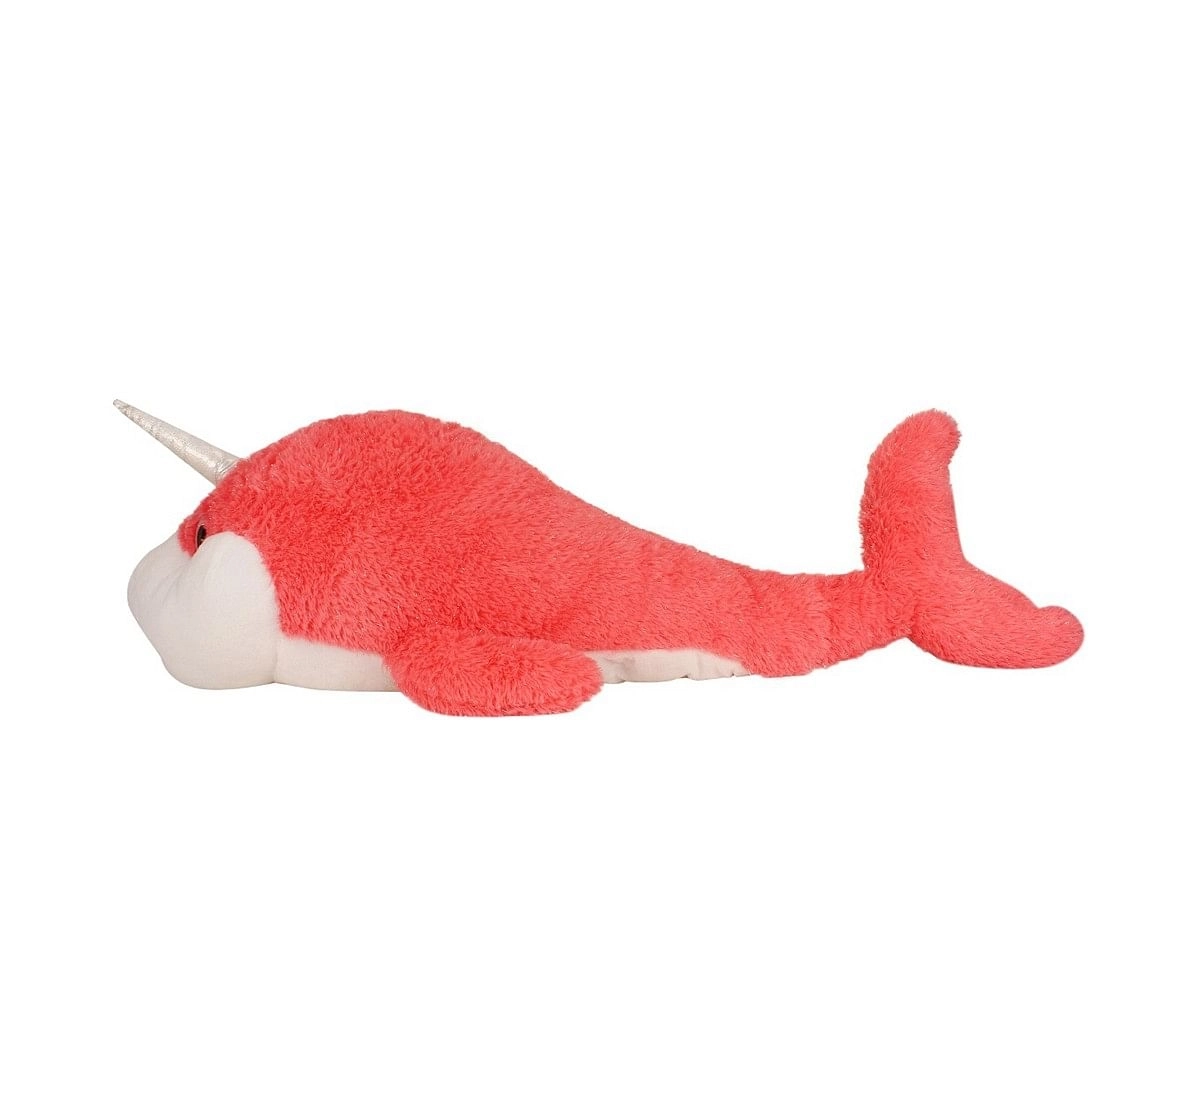 Fuzzbuzz The Narwhal Plush - Pink - 105Cm Quirky Soft Toys for Kids age 12M+ - 40 Cm (Pink)